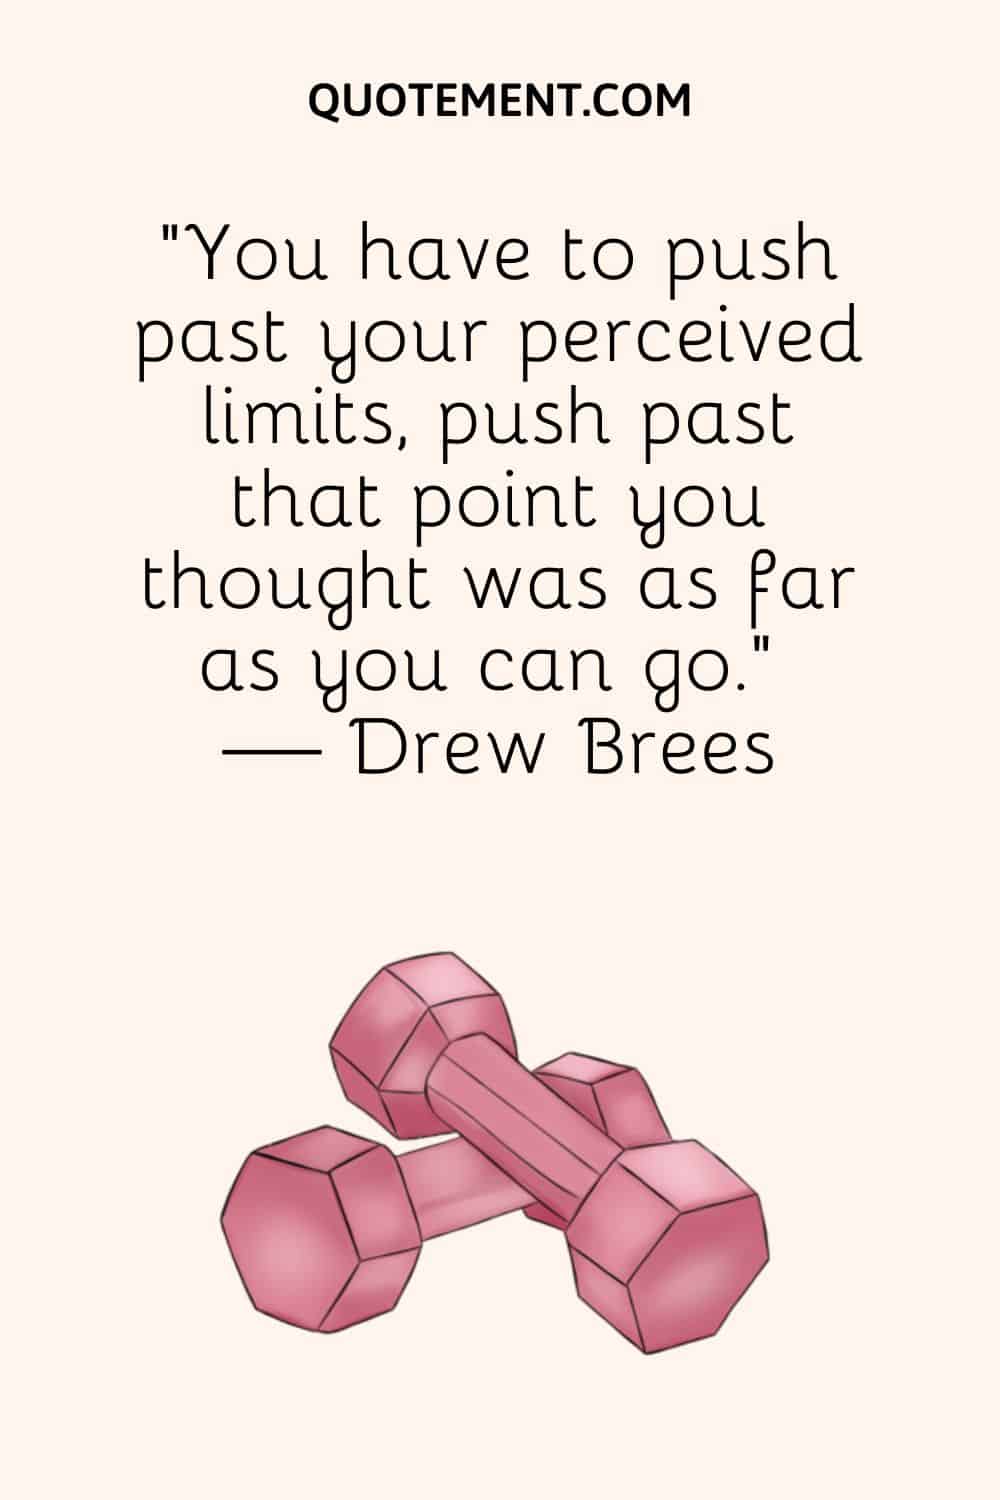 “You have to push past your perceived limits, push past that point you thought was as far as you can go.” — Drew Brees